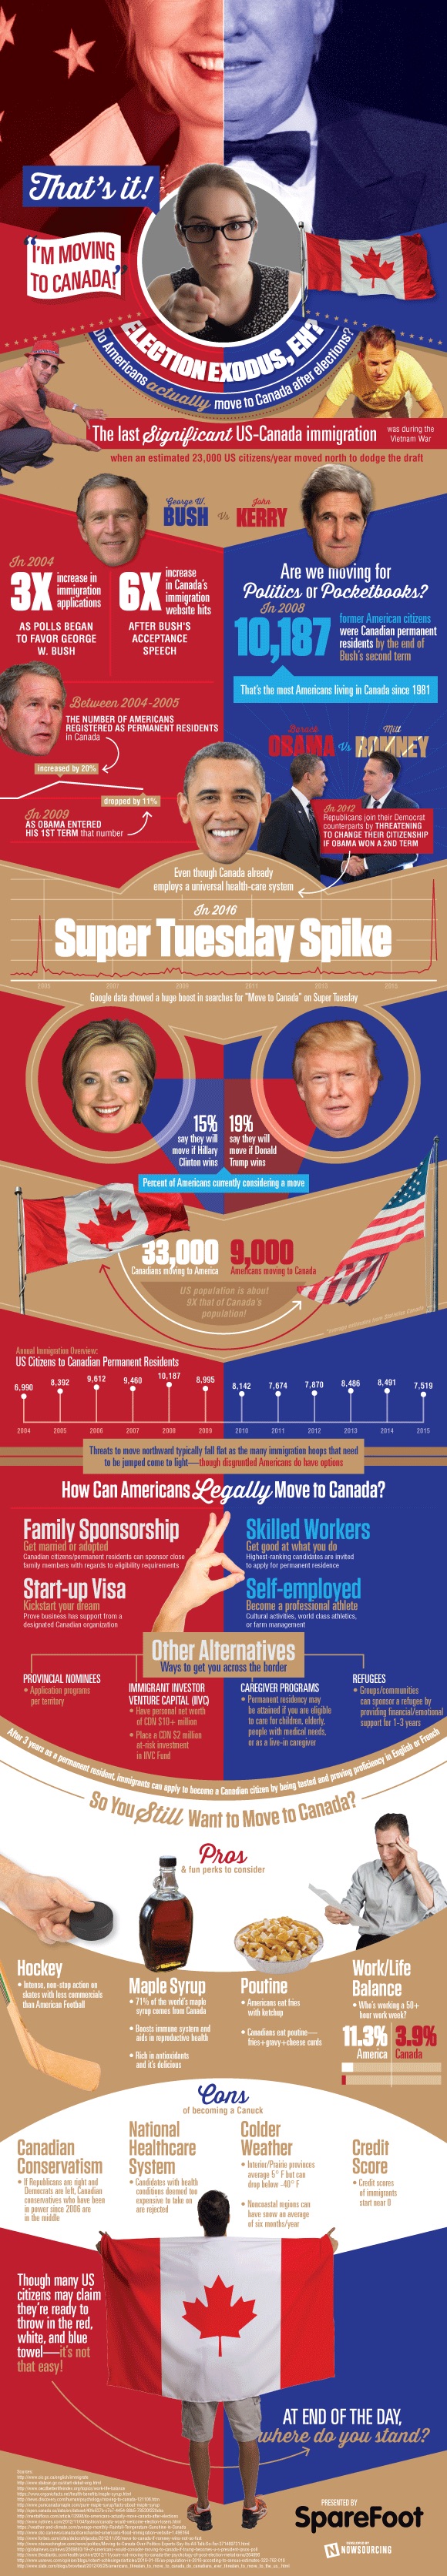 Election Exodus - Moving to Canada infographic